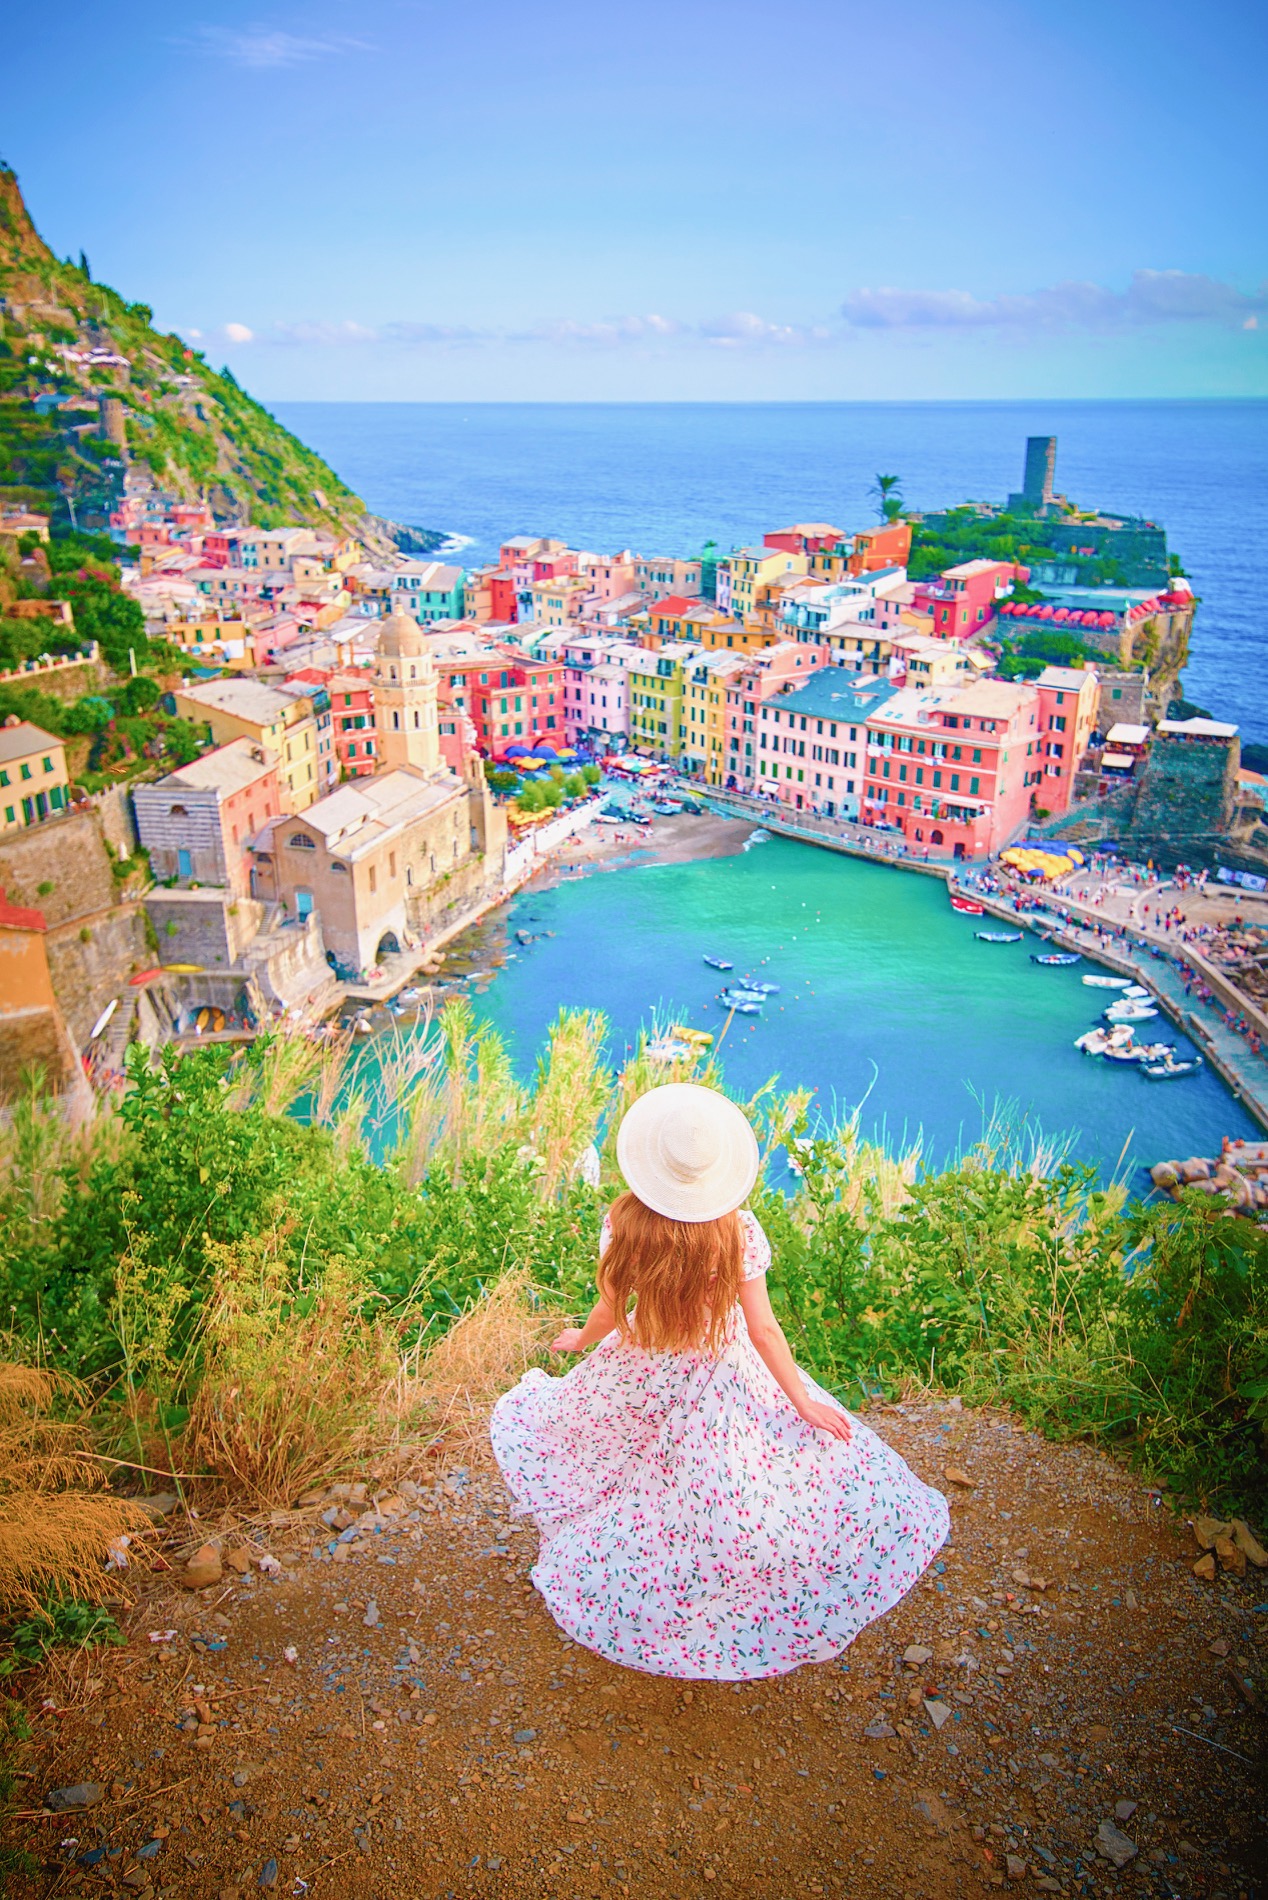 Woman in a dress and sun hat overlooking colorful buildings and a harbor in Cinque Terre, Italy.